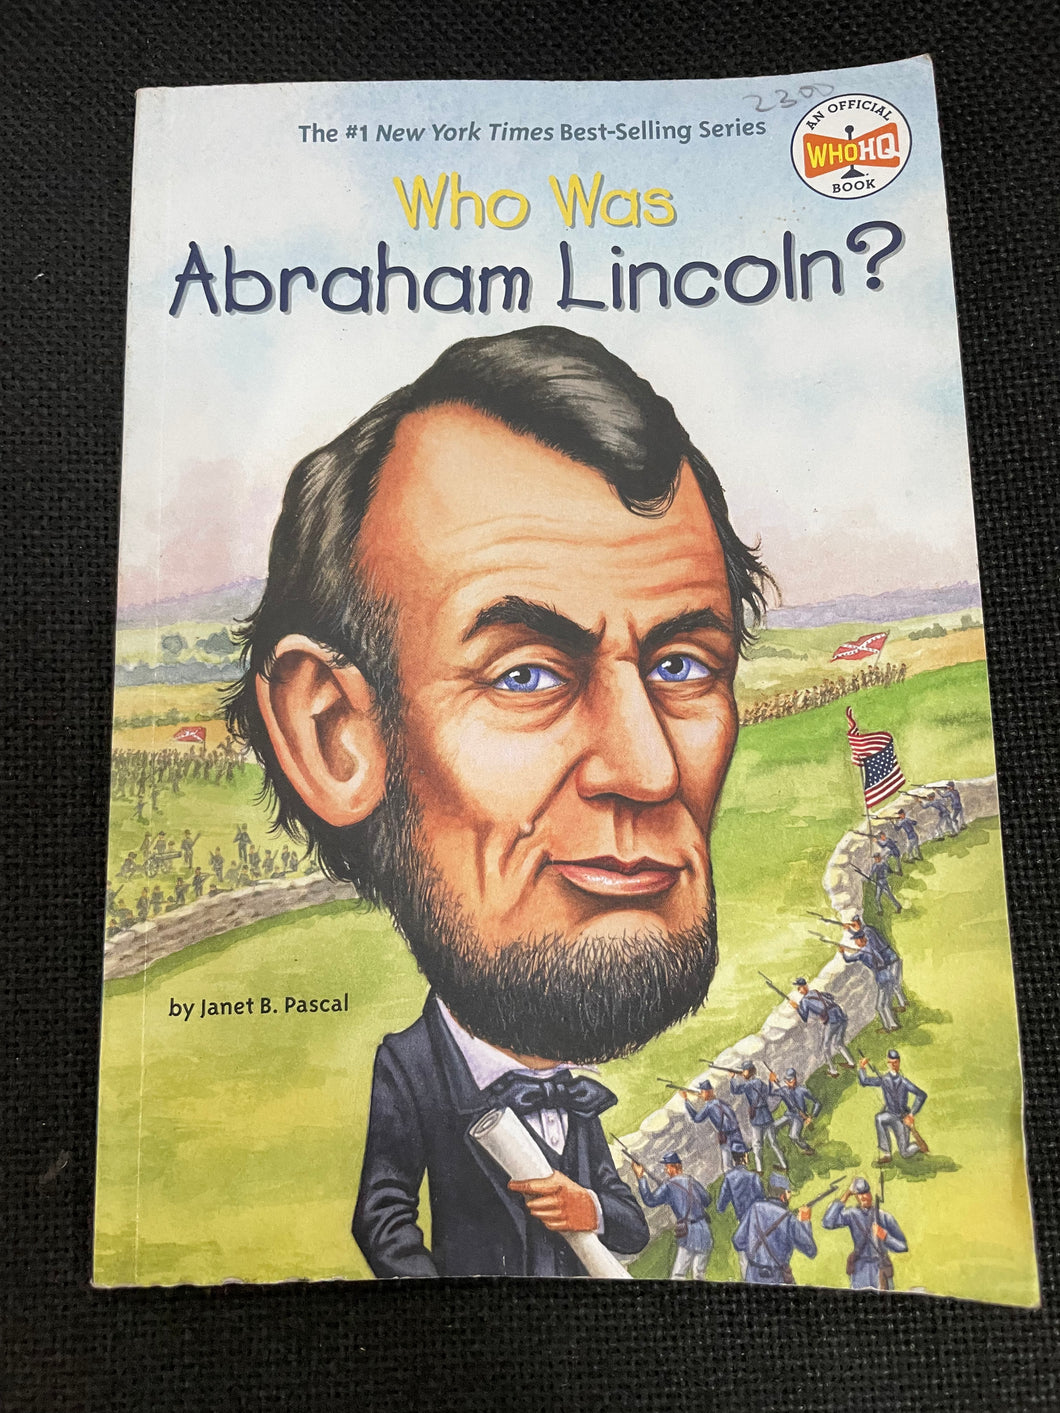 WHO IS ABRAHAM LINCOLN?